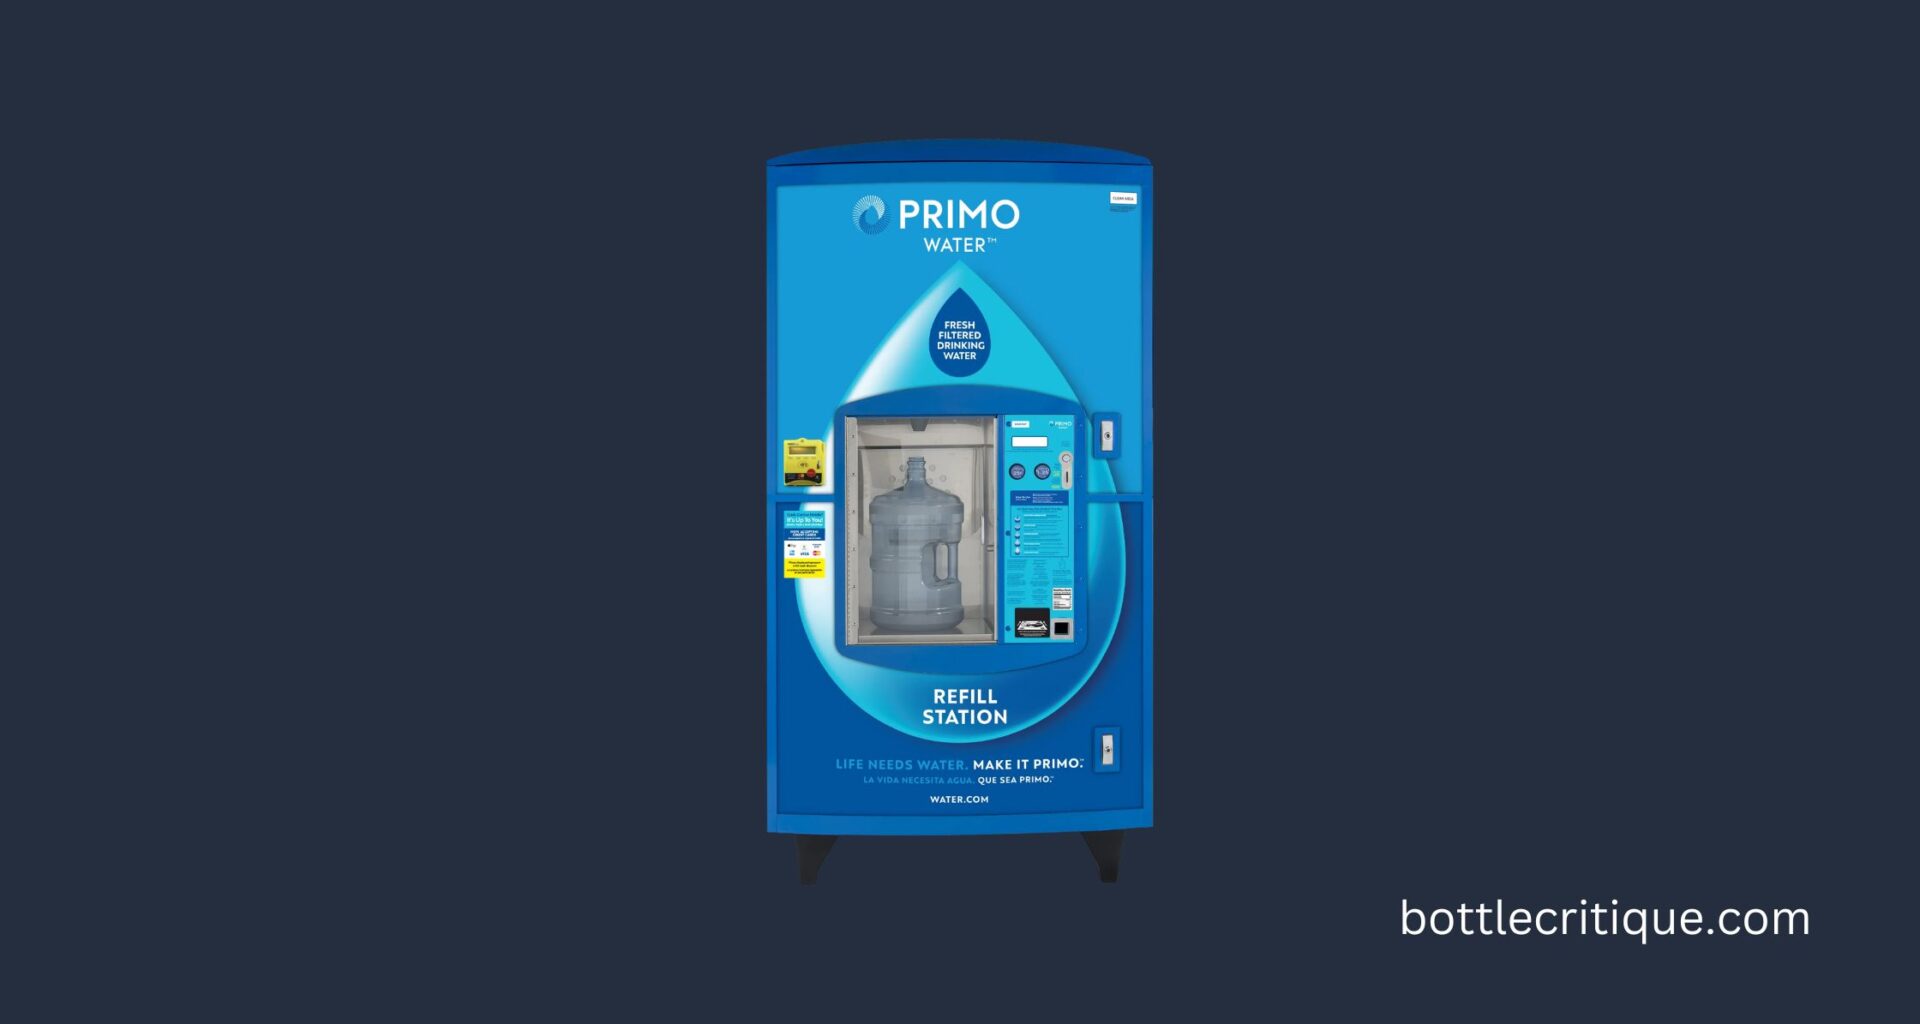 How to Refill Primo Water Bottle?